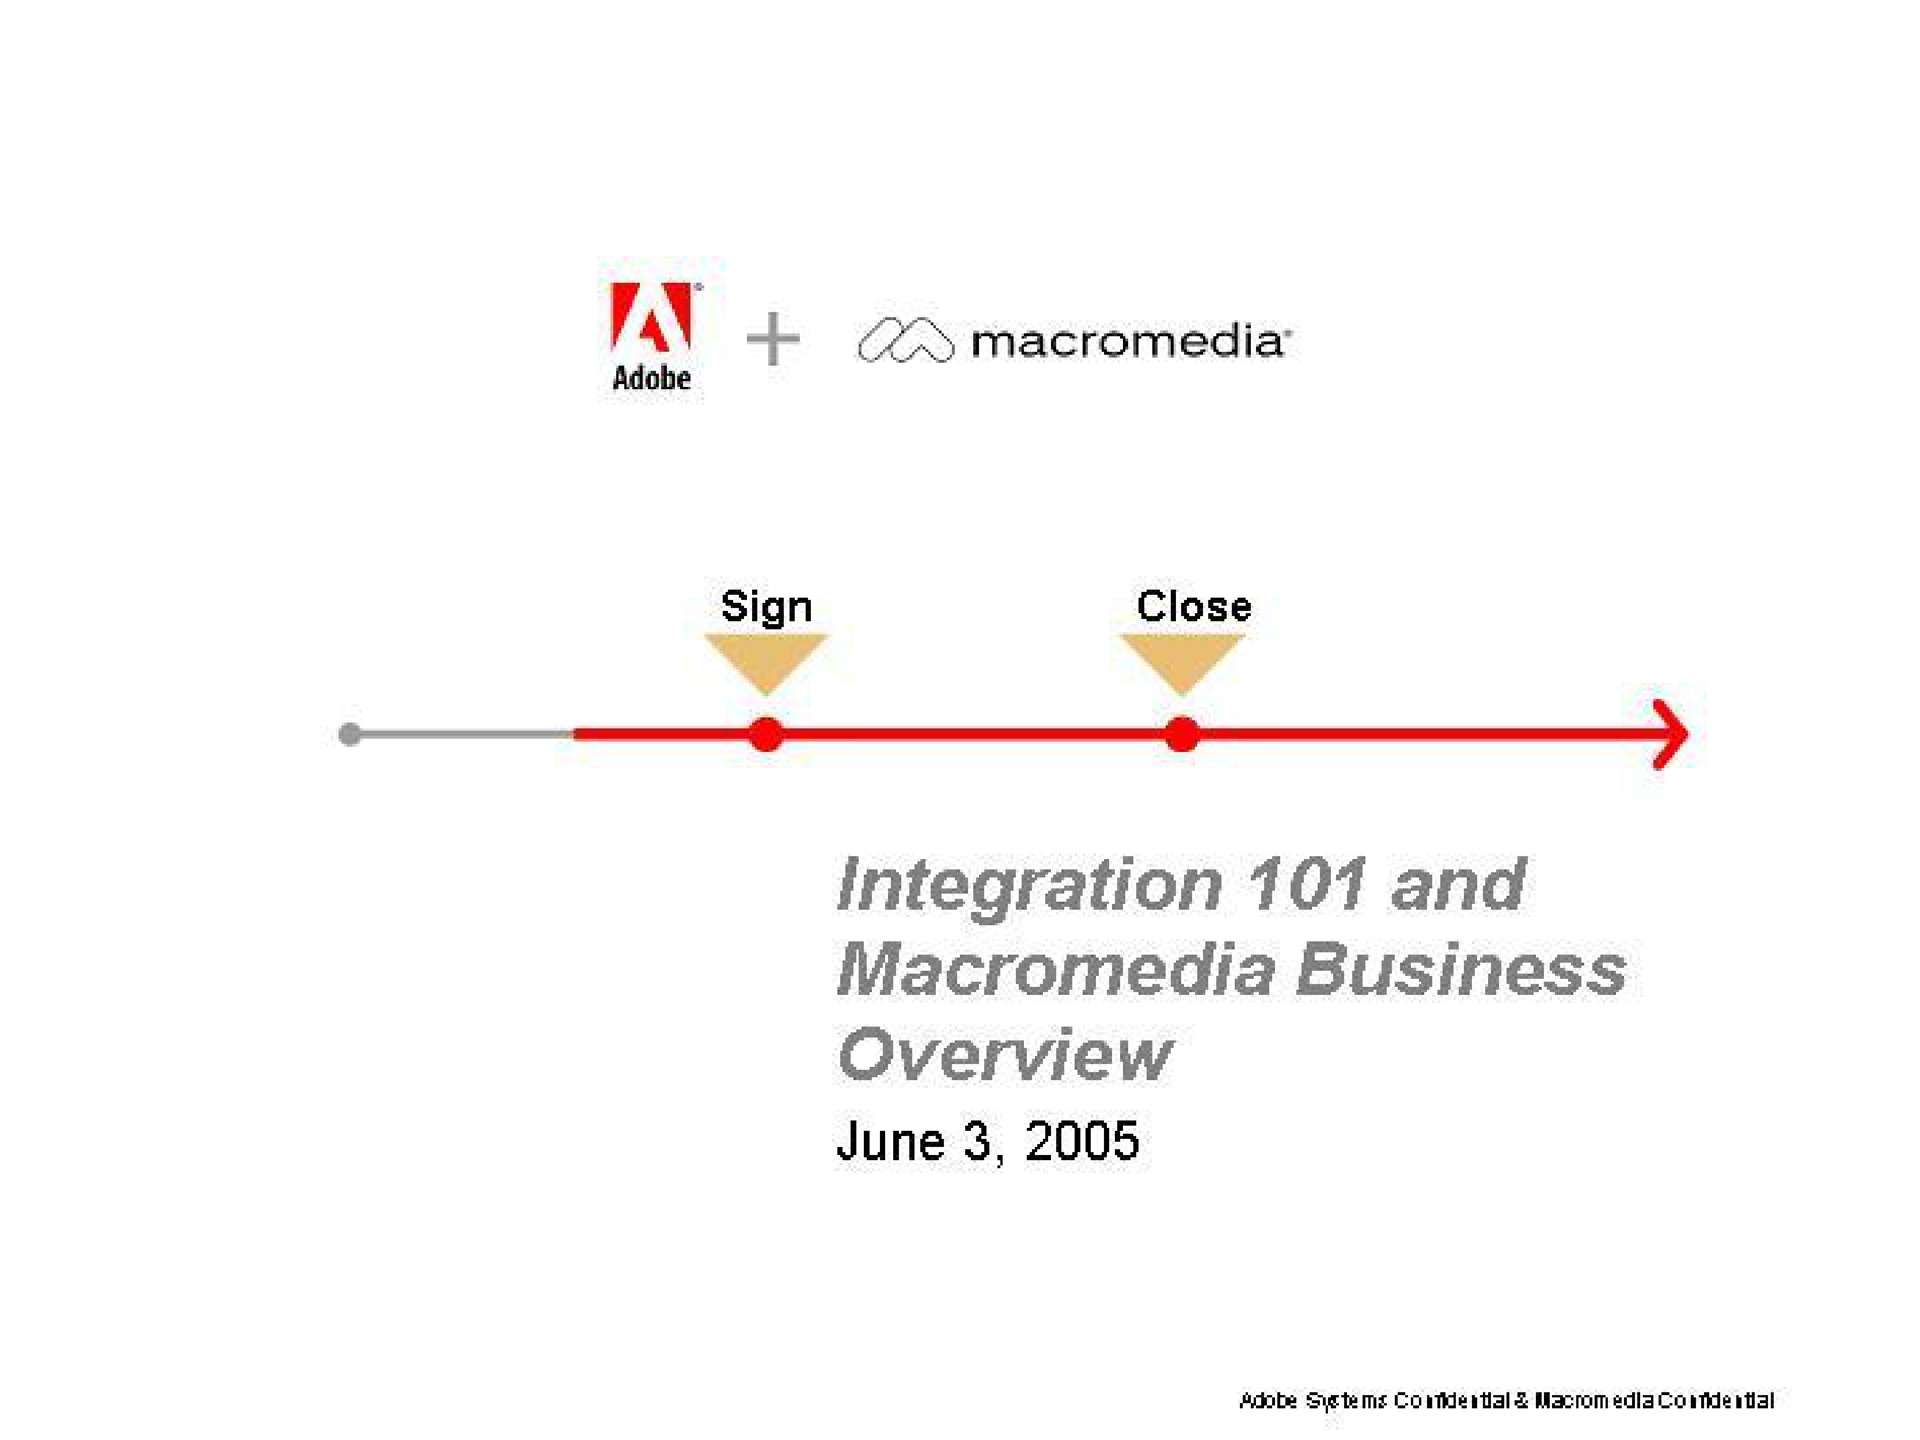 integration and business overview | Adobe